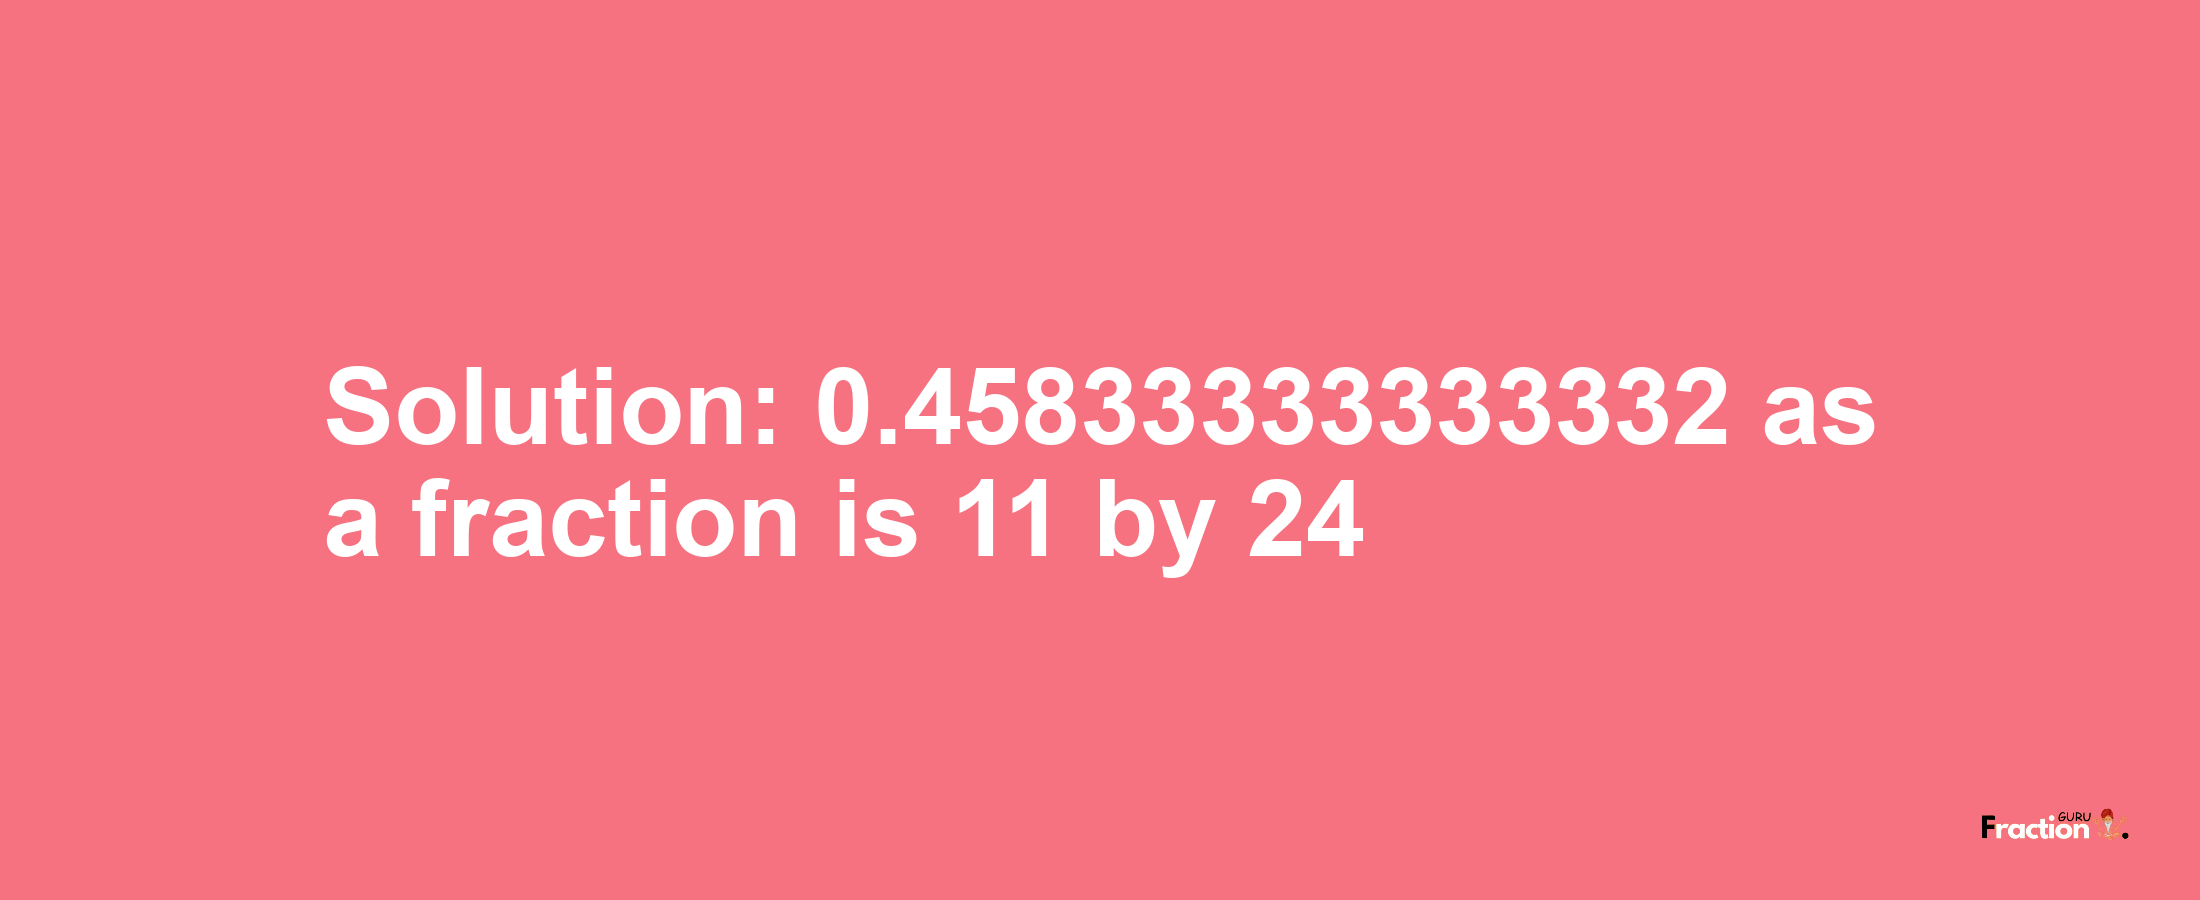 Solution:0.45833333333332 as a fraction is 11/24